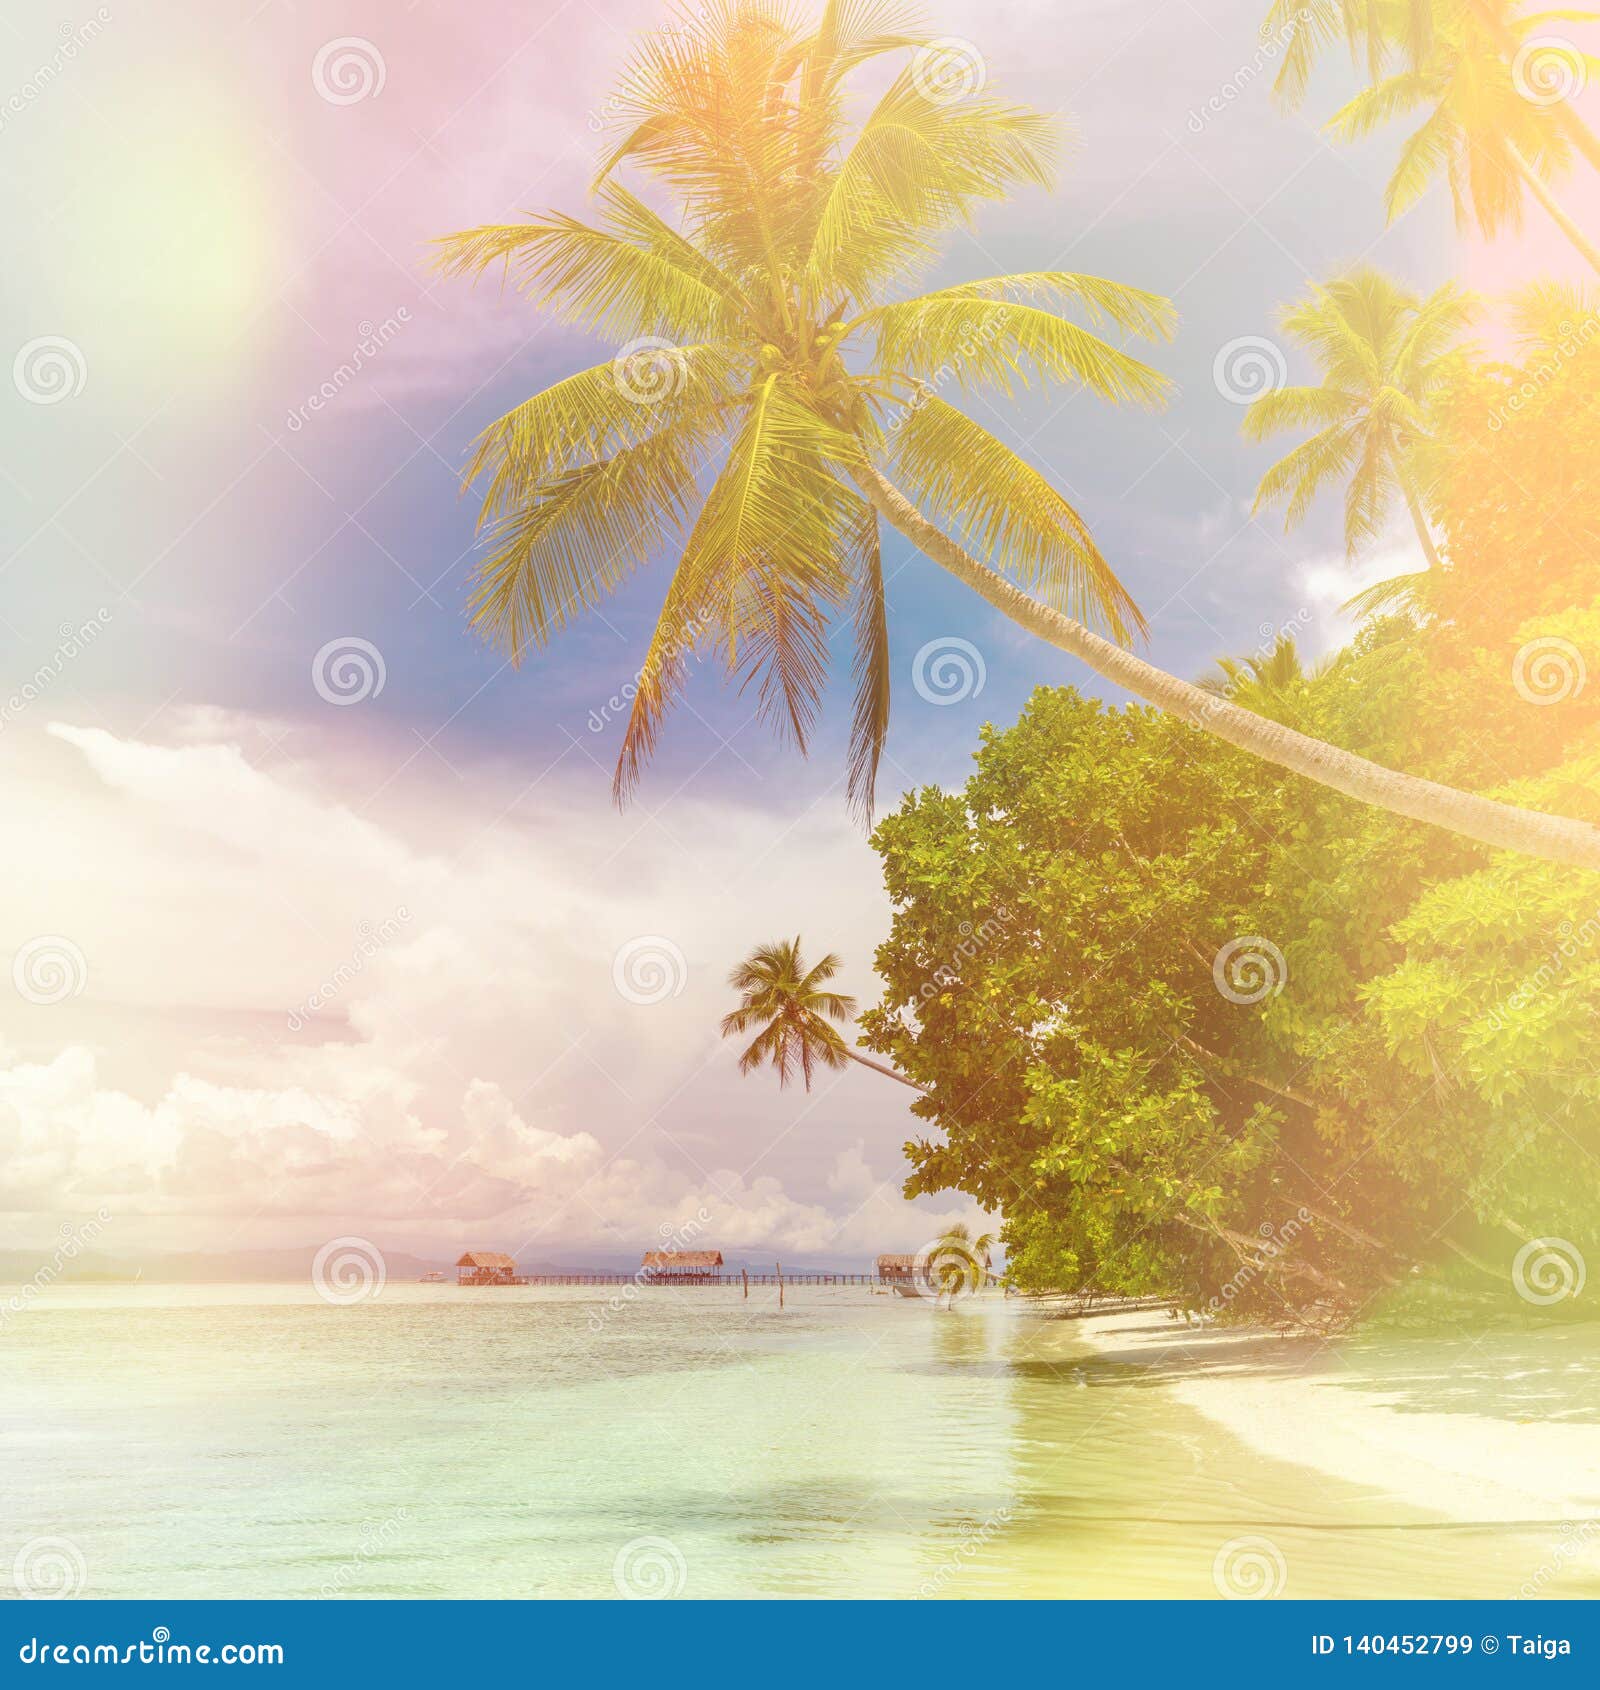 SUNNY BEACH TROPICAL PARADISE PALM TREES WALL POSTER ART PICTURE PRINT LARGE